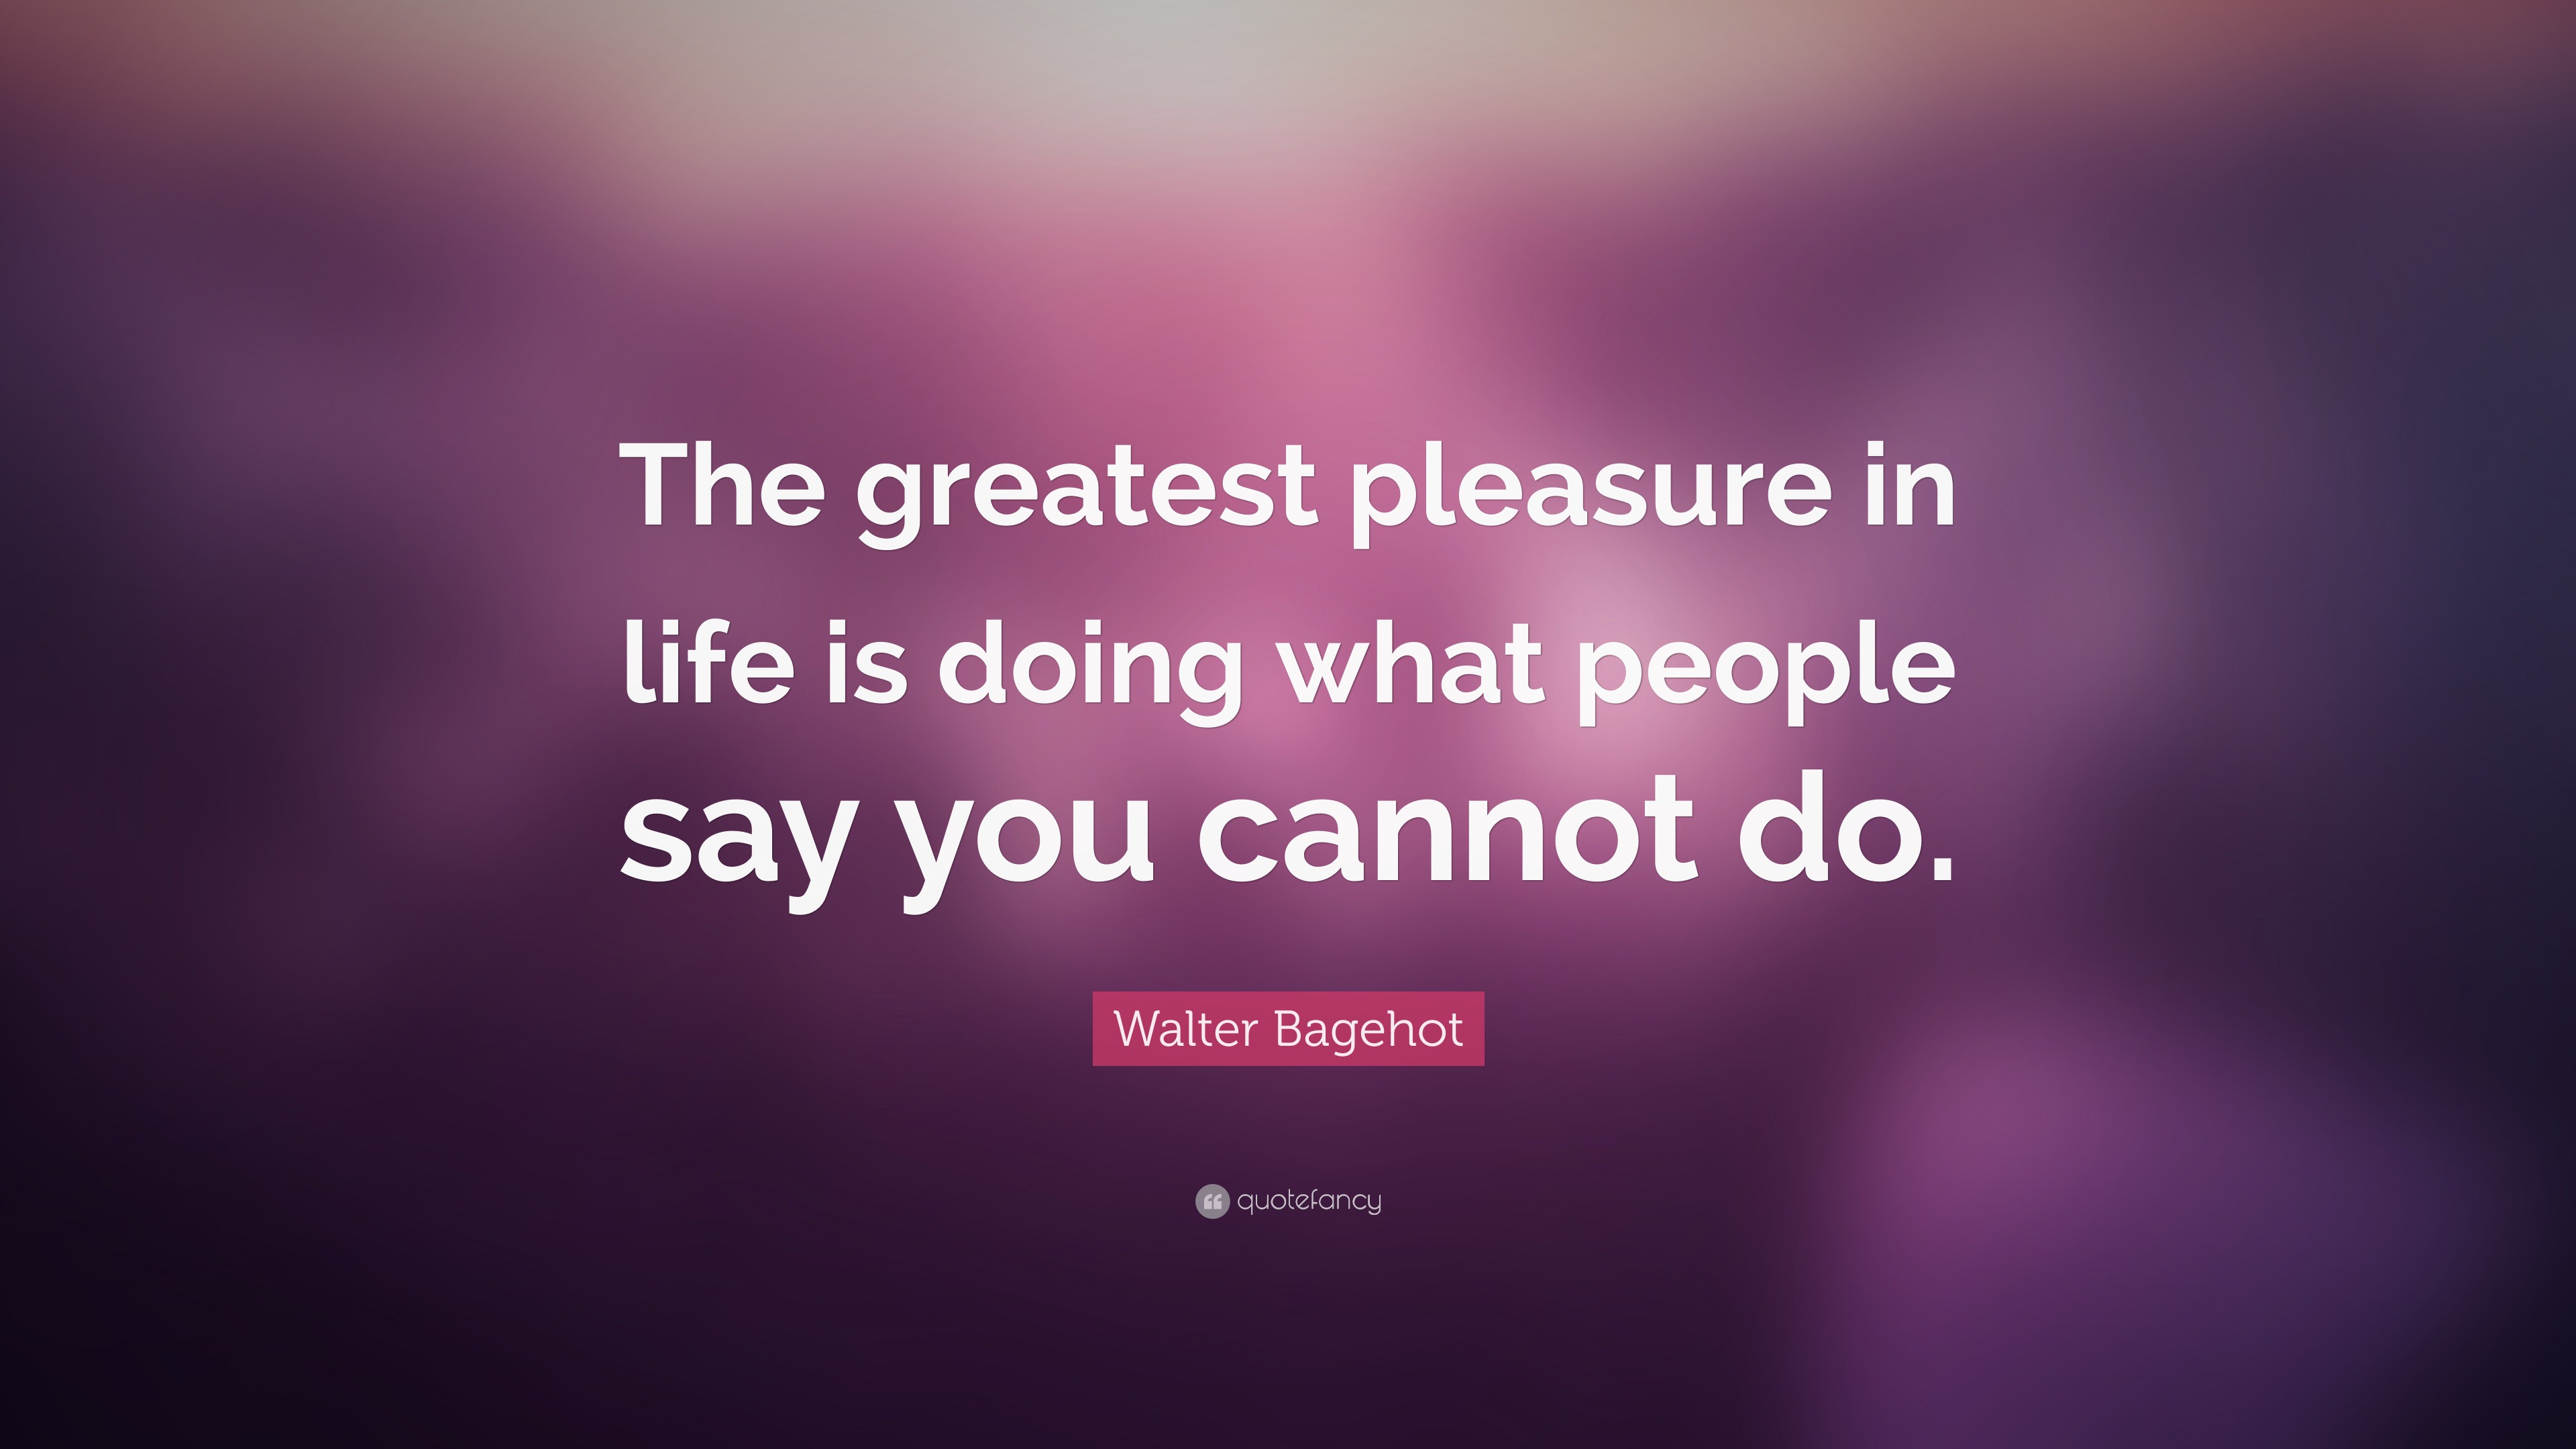 Walter Bagehot Quote: “The greatest pleasure in life is doing what ...